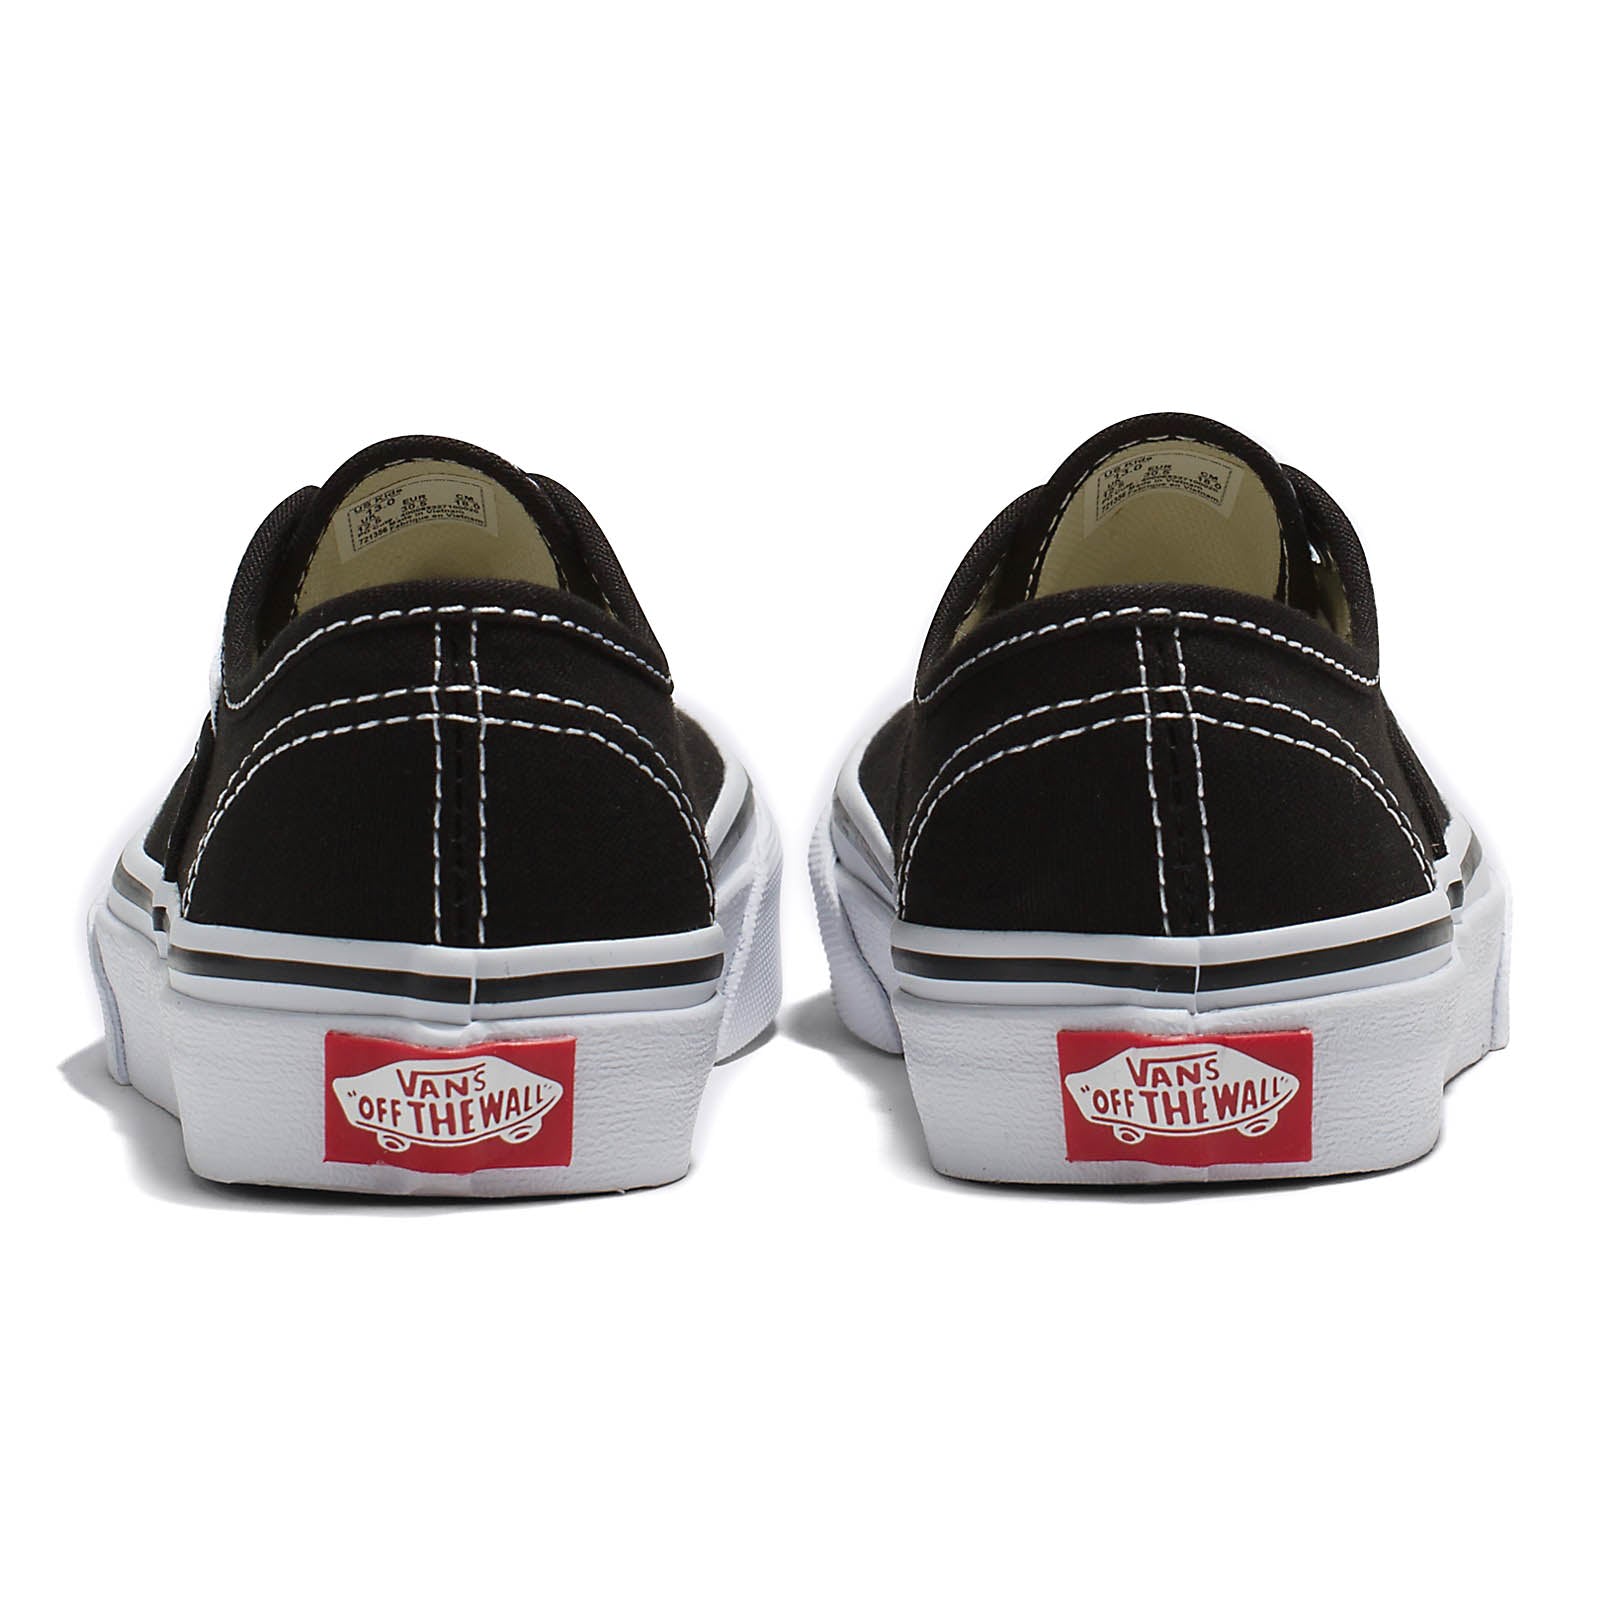 Youth Authentic - Black/True White